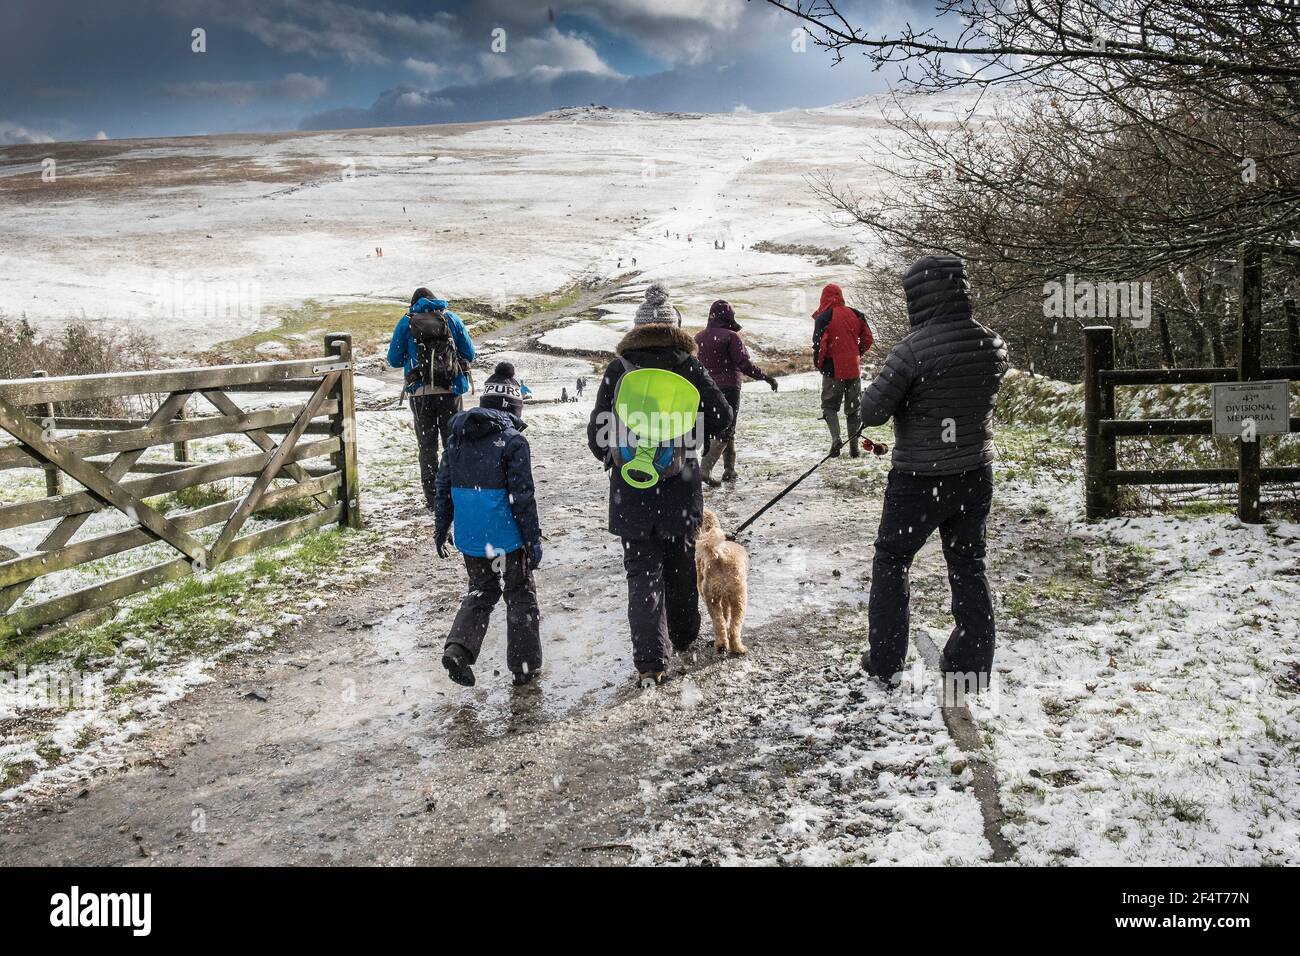 A family enjoying walking in the snow on the wild rugged Rough Tor on Bodmin Moor in Cornwall. Stock Photo